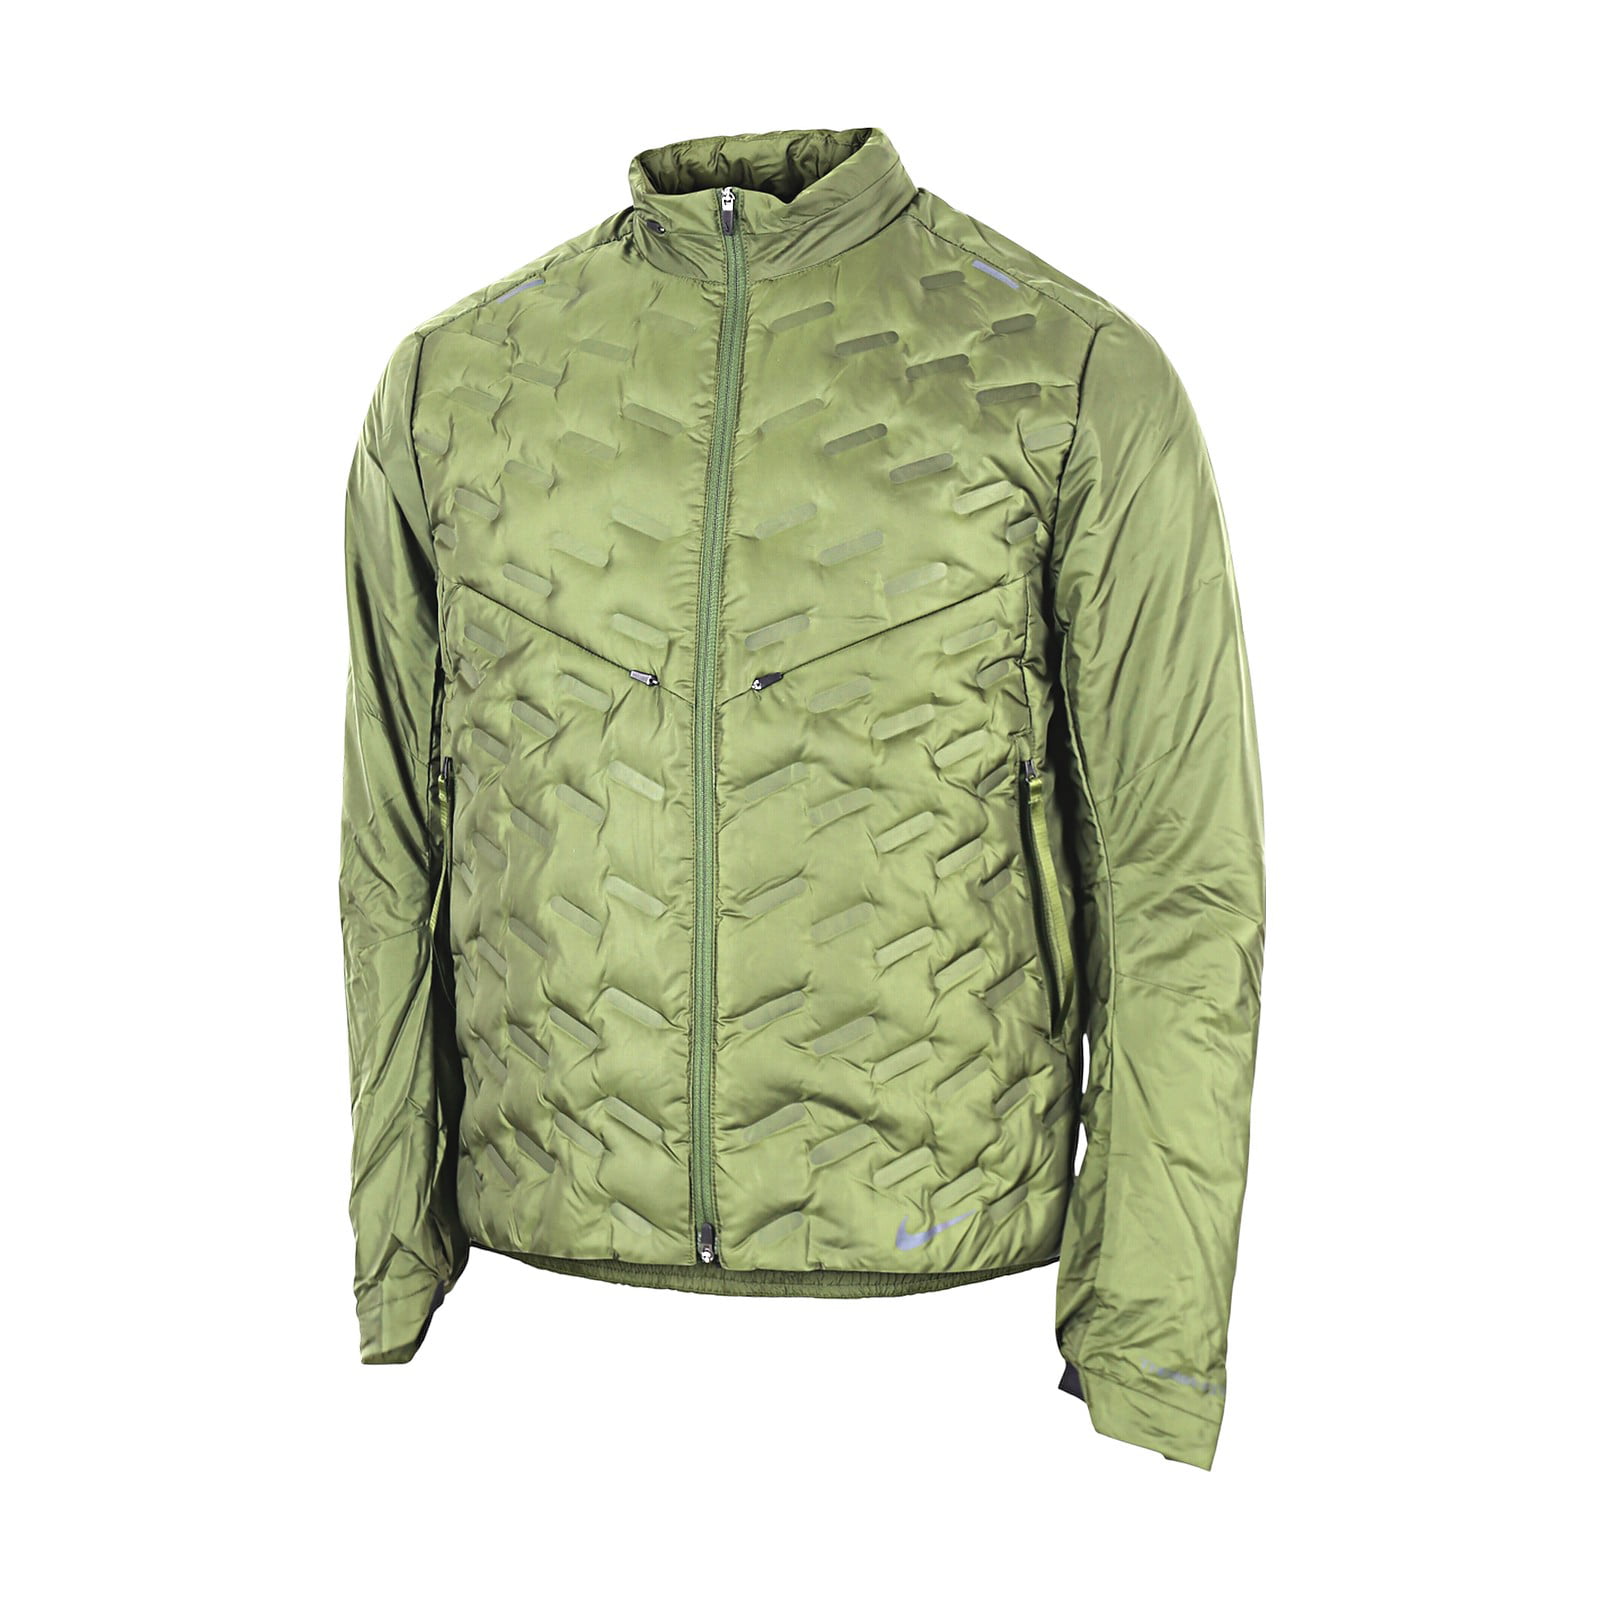 Nike Therma-FIT ADV Repel Men's Down Insulated Running Jacket (Small,  Alligator)